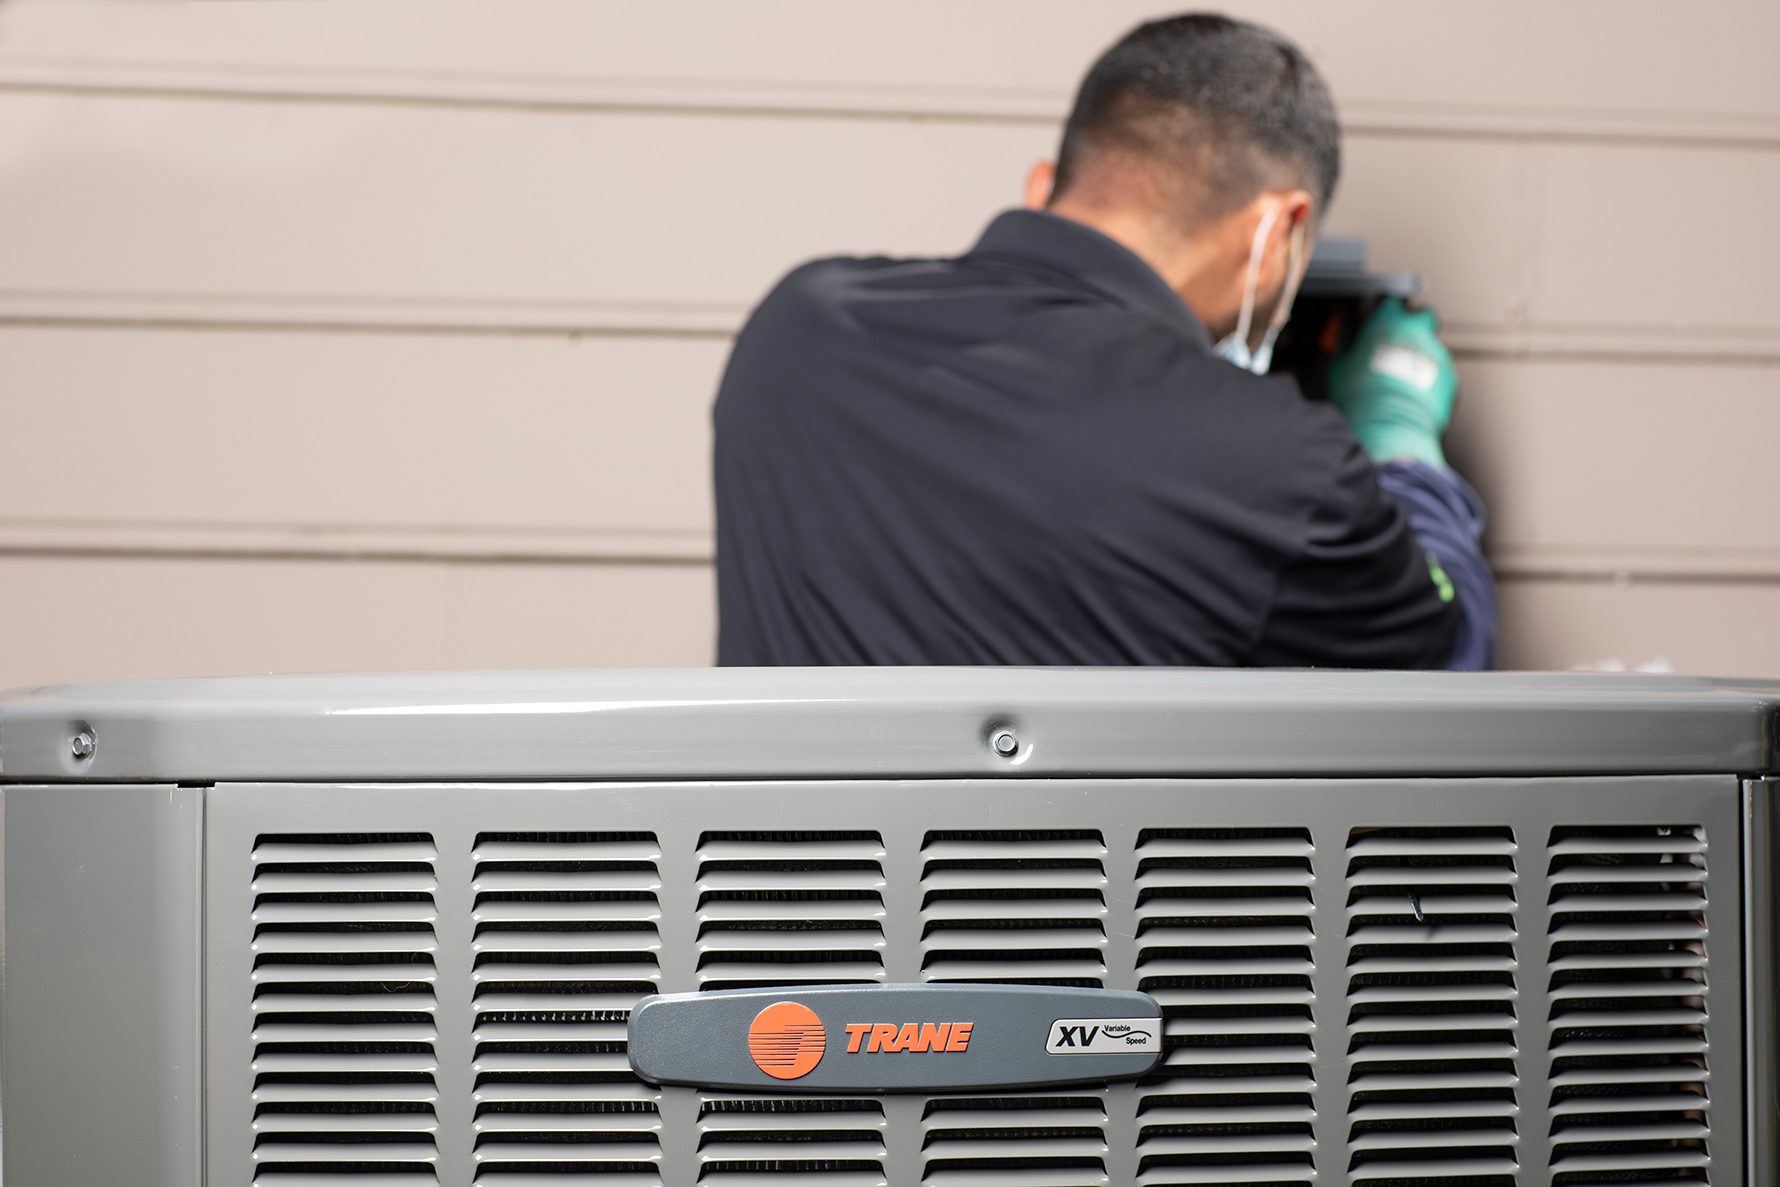 Professional installing HVAC equipment on a wall